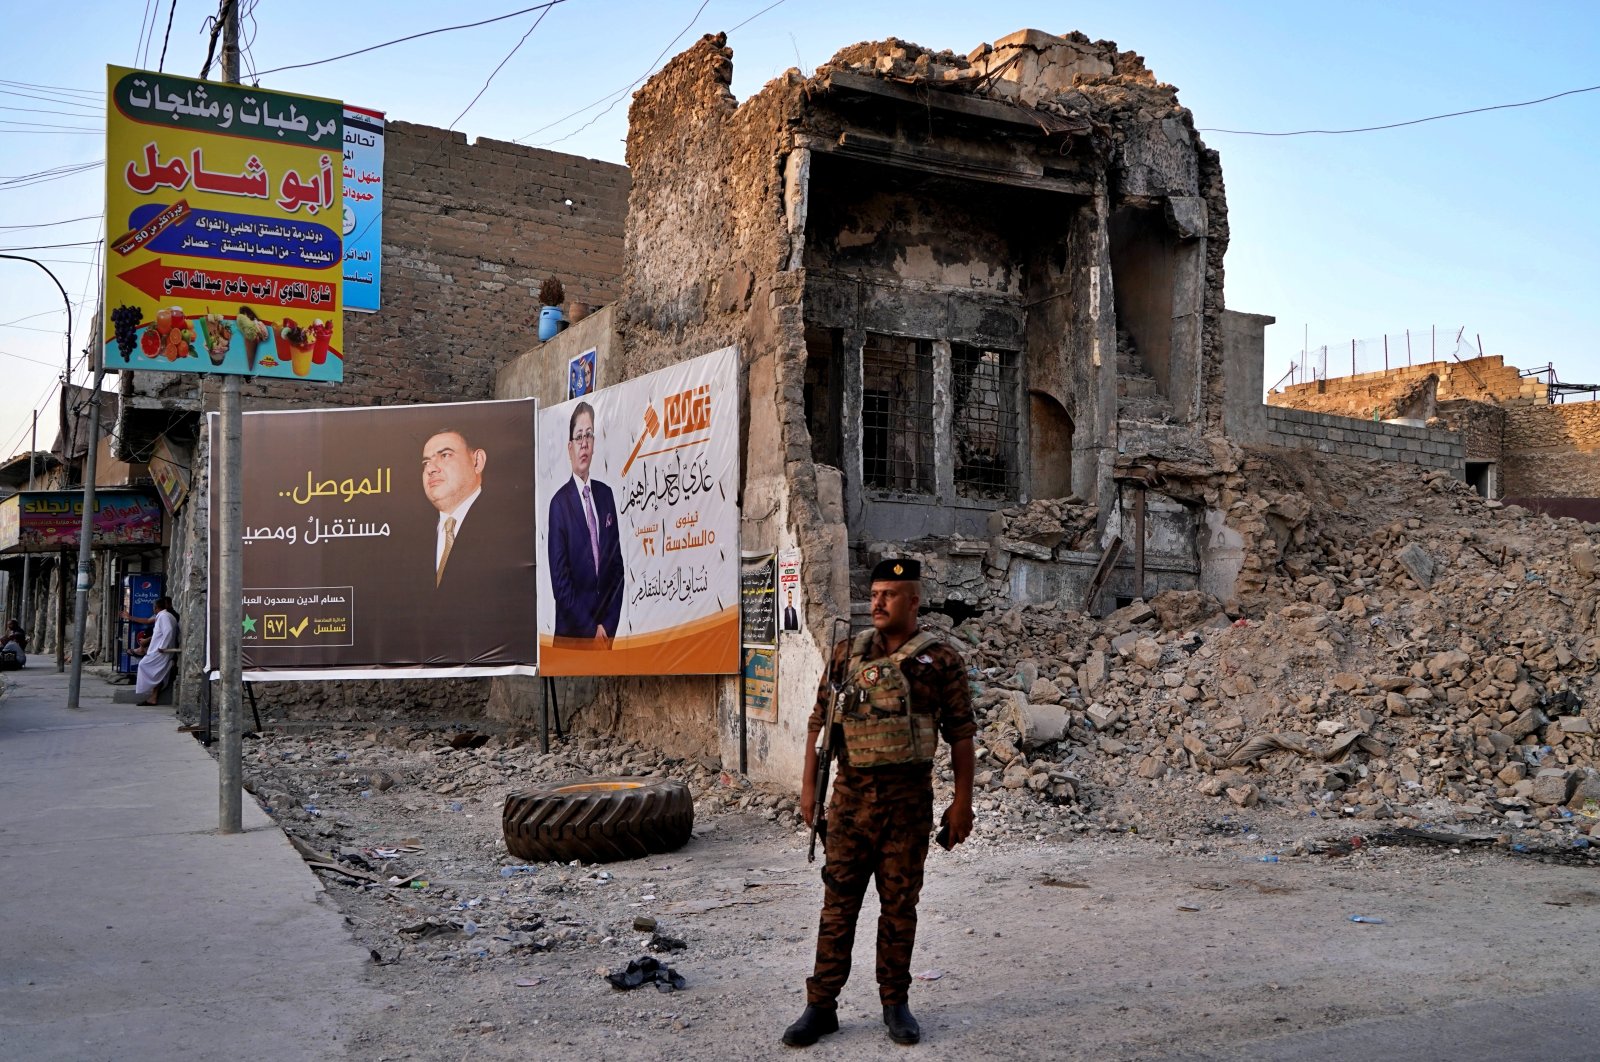 An Iraqi federal policeman stands guard near campaign posters for parliamentary elections are displayed near destroyed buildings from fighting between Iraqi forces and the Daesh terror group in Mosul, Iraq, Oct. 3, 2021. (AP Photo)